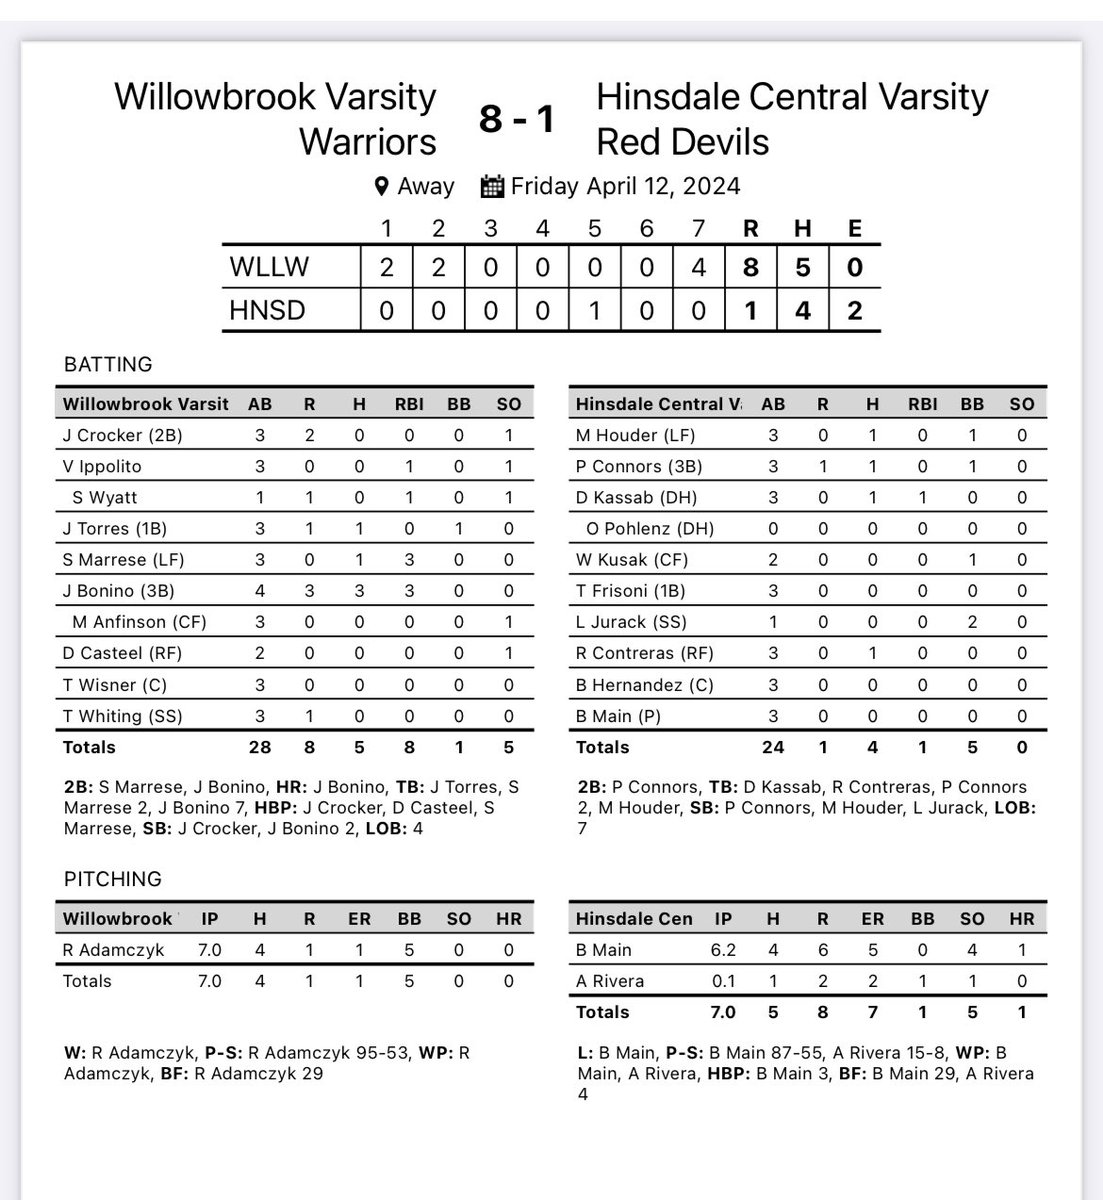 Warriors bounce back with a 8 - 1 win over Hinsdale Central    Adamczyk with a complete game gem    Bonino with a 3 hit day including his 3rd HR    Torres and Marrese with big hits    Game team win!